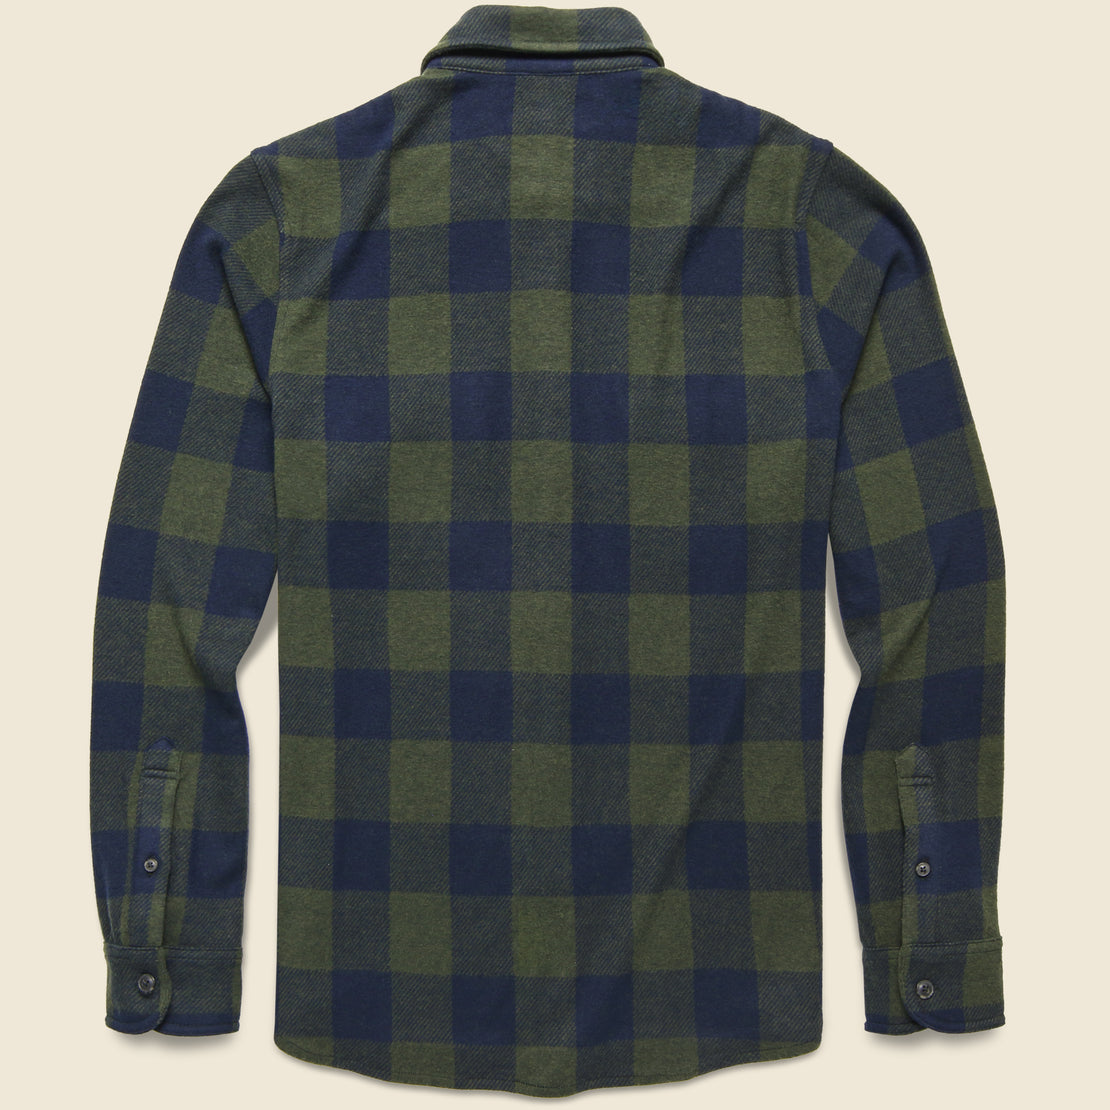 Legend Sweater Shirt - Navy Olive Buffalo - Faherty - STAG Provisions - Tops - L/S Woven - Plaid